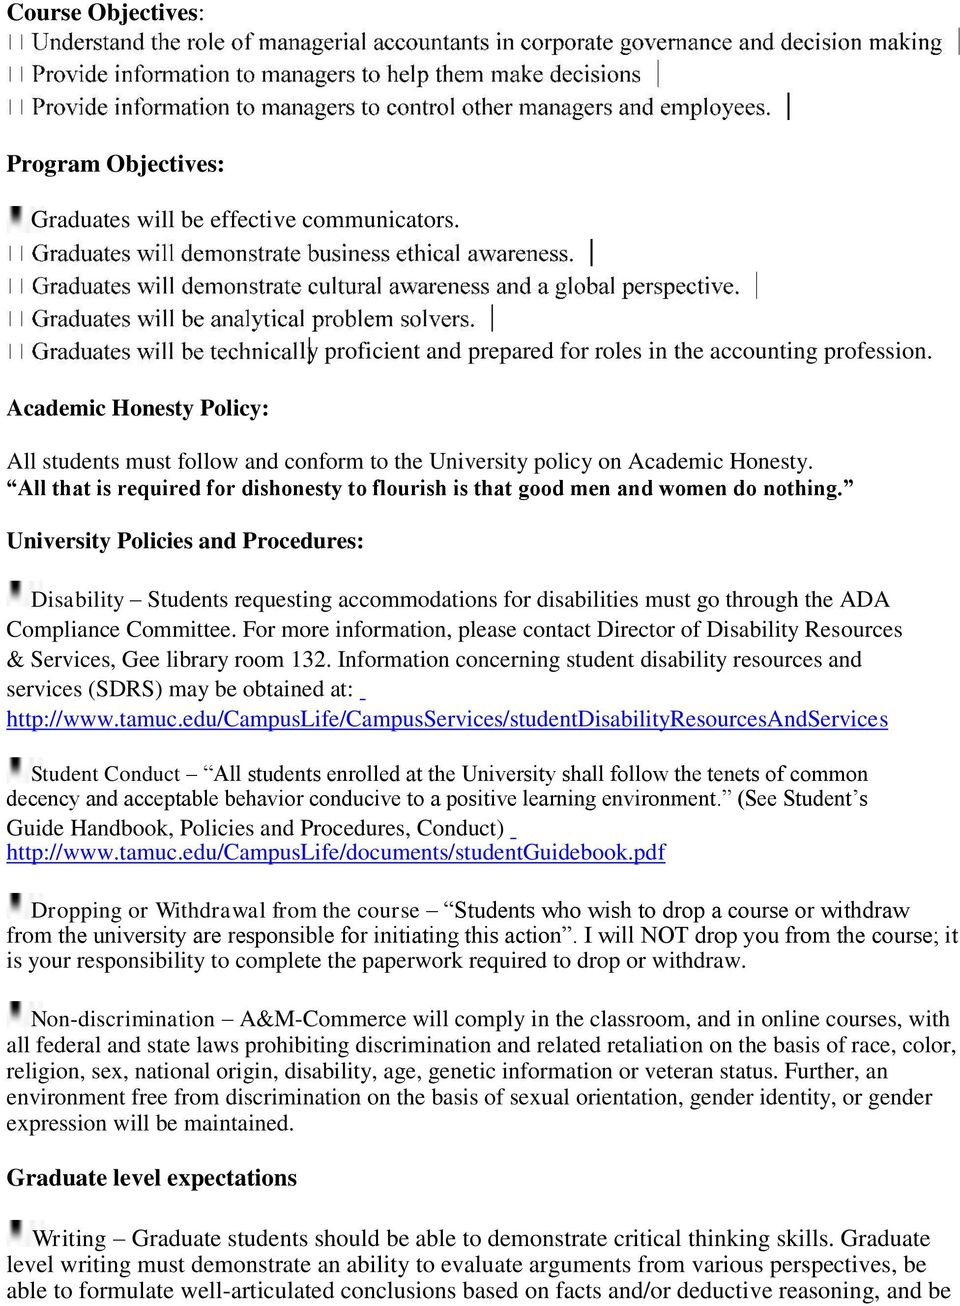 University Policies and Procedures: Disability Students requesting accommodations for disabilities must go through the ADA Compliance Committee.